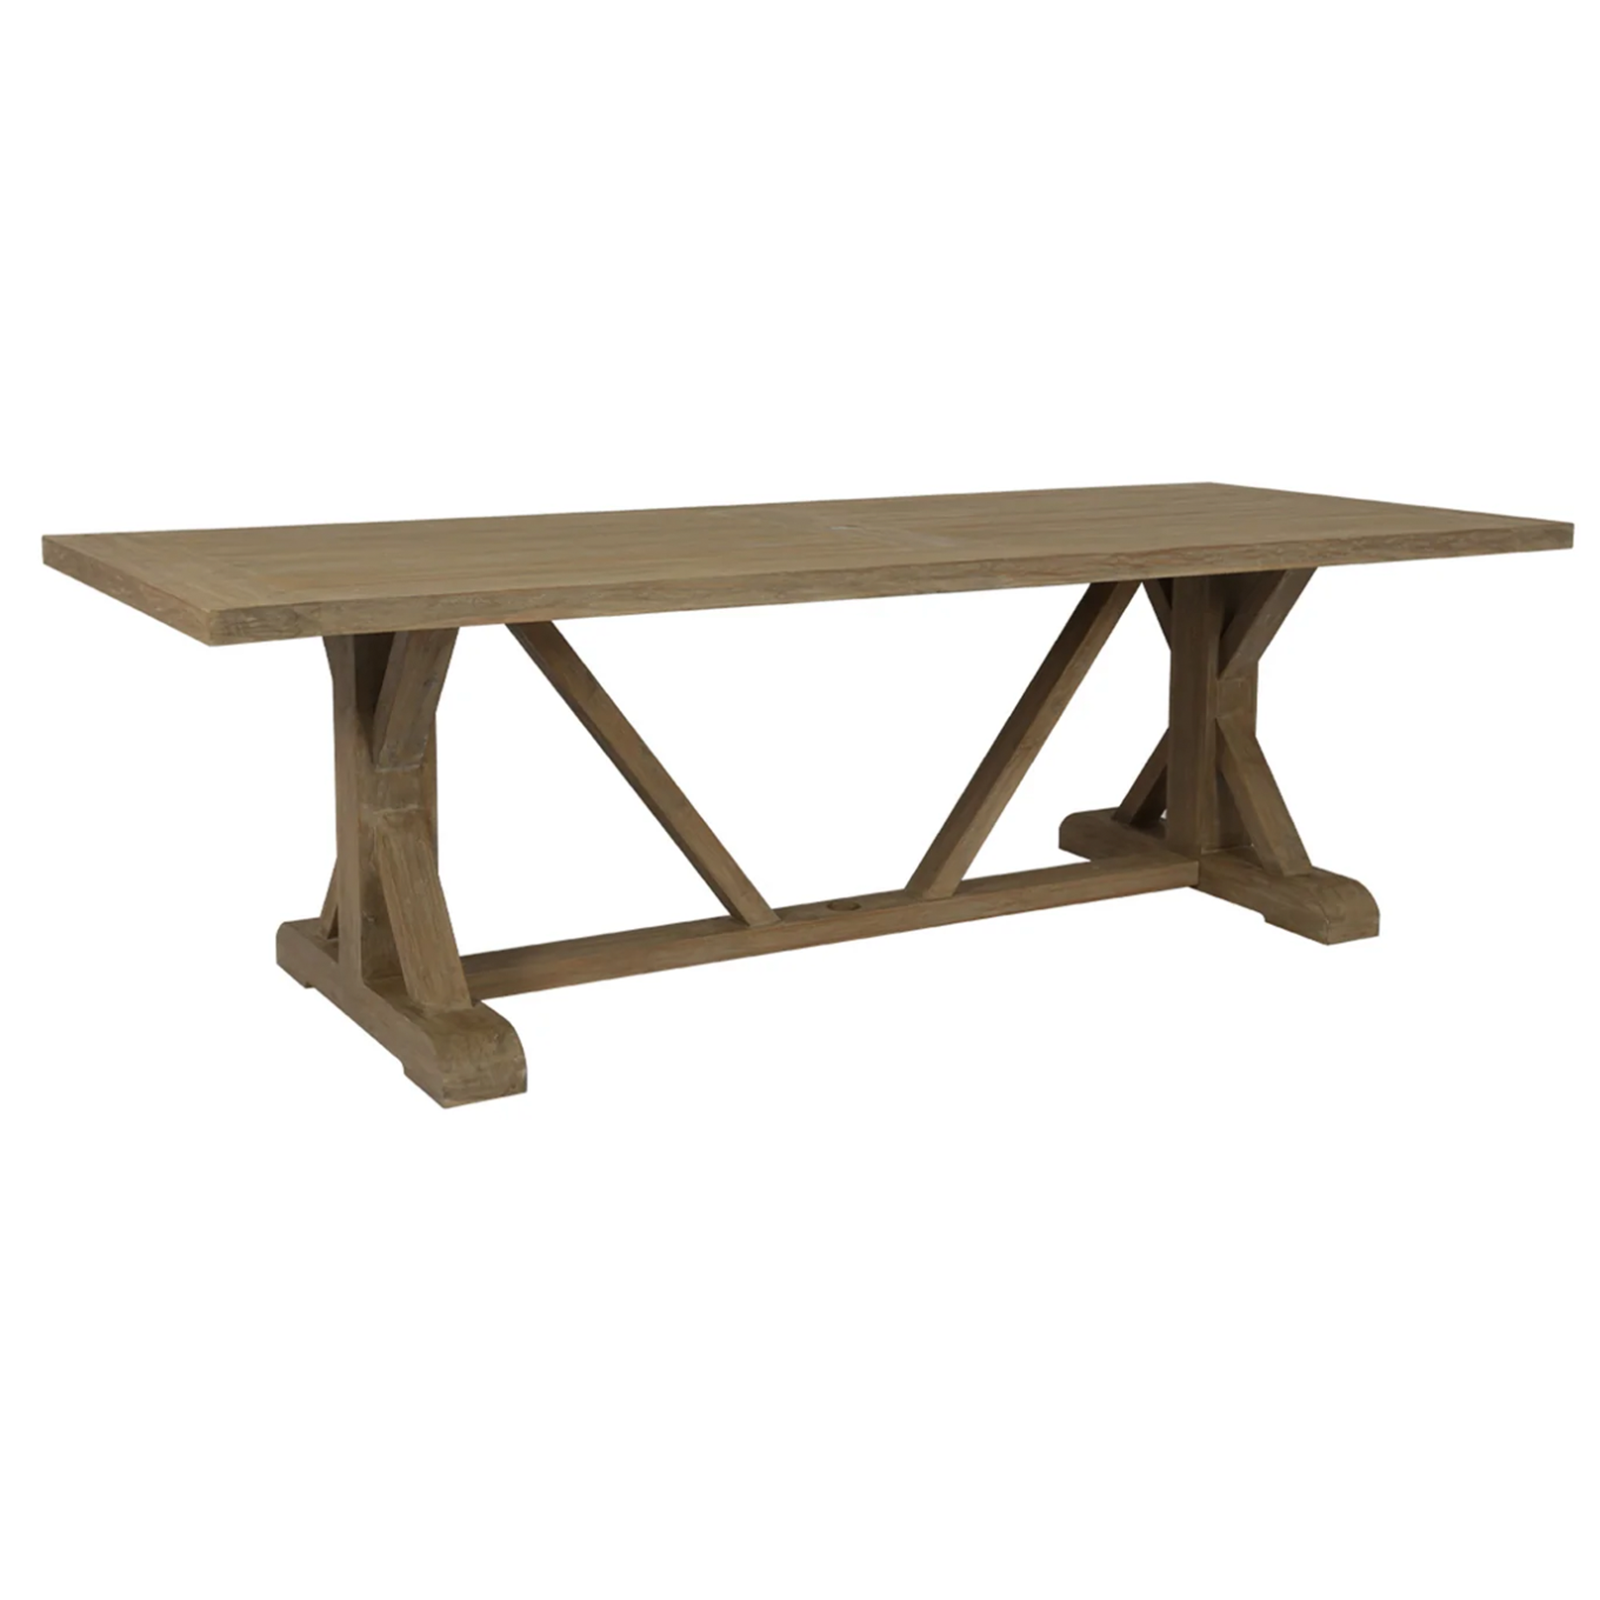 Panning 94" Outdoor Dining Table